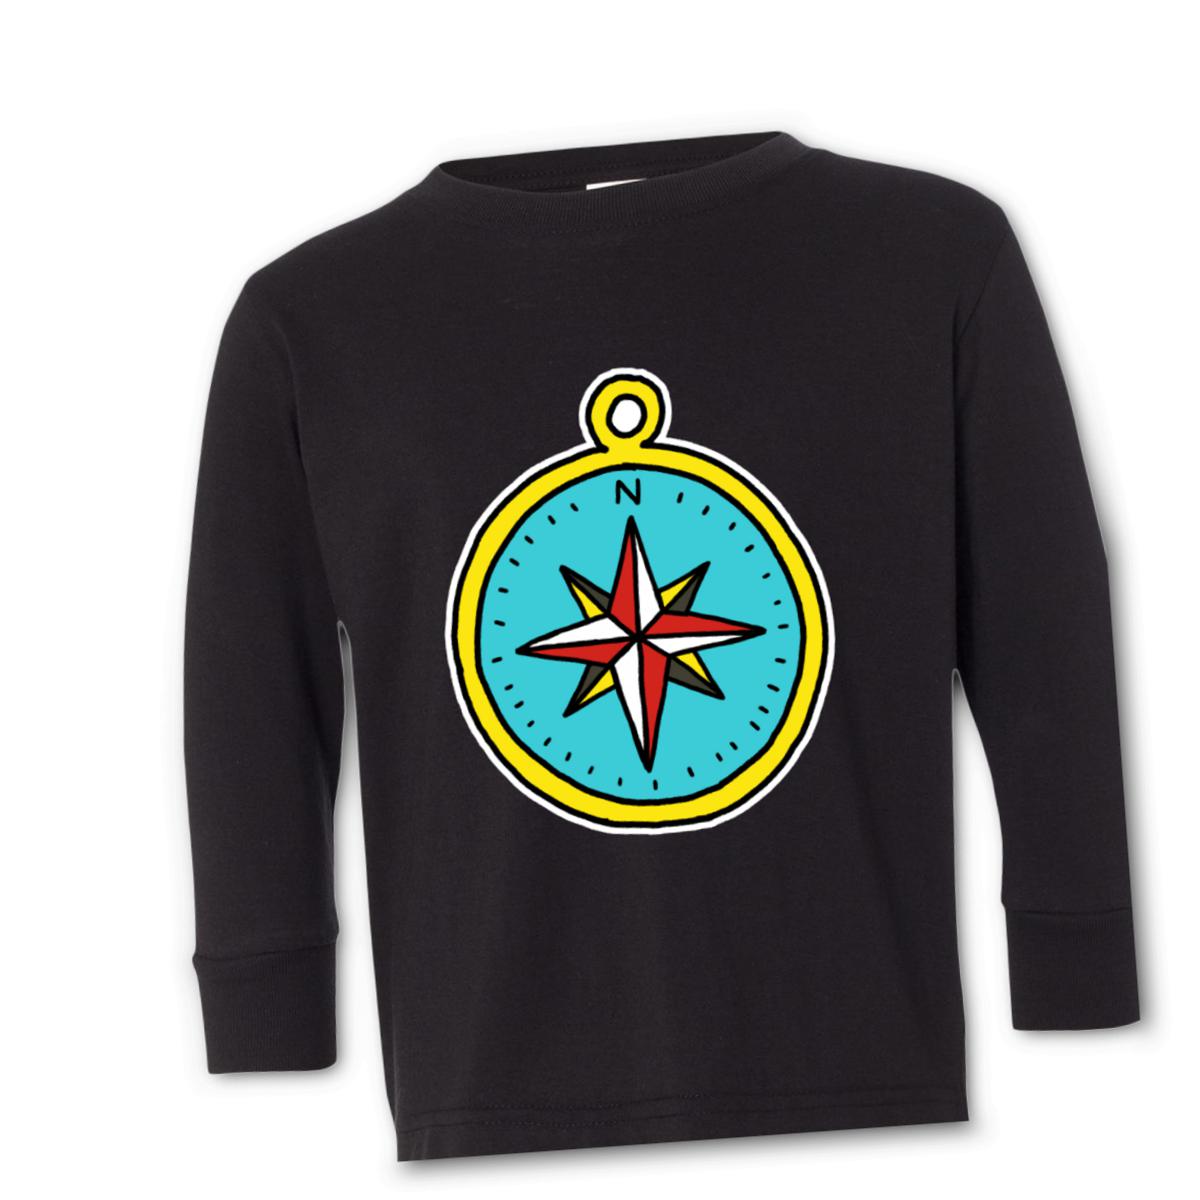 American Traditional Compass Toddler Long Sleeve Tee 2T black